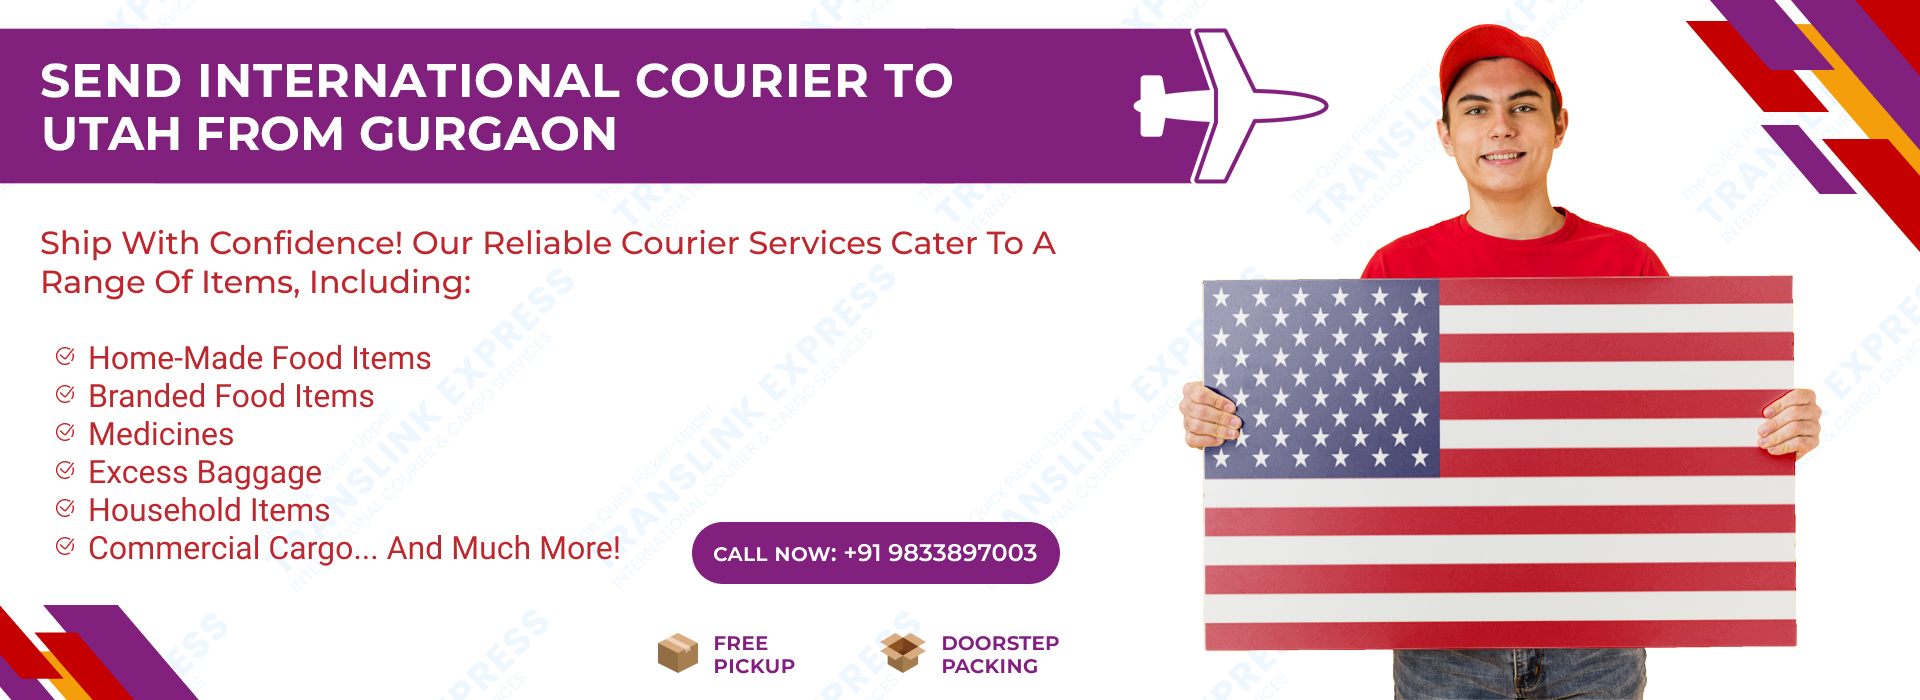 Courier to Utah From Gurgaon